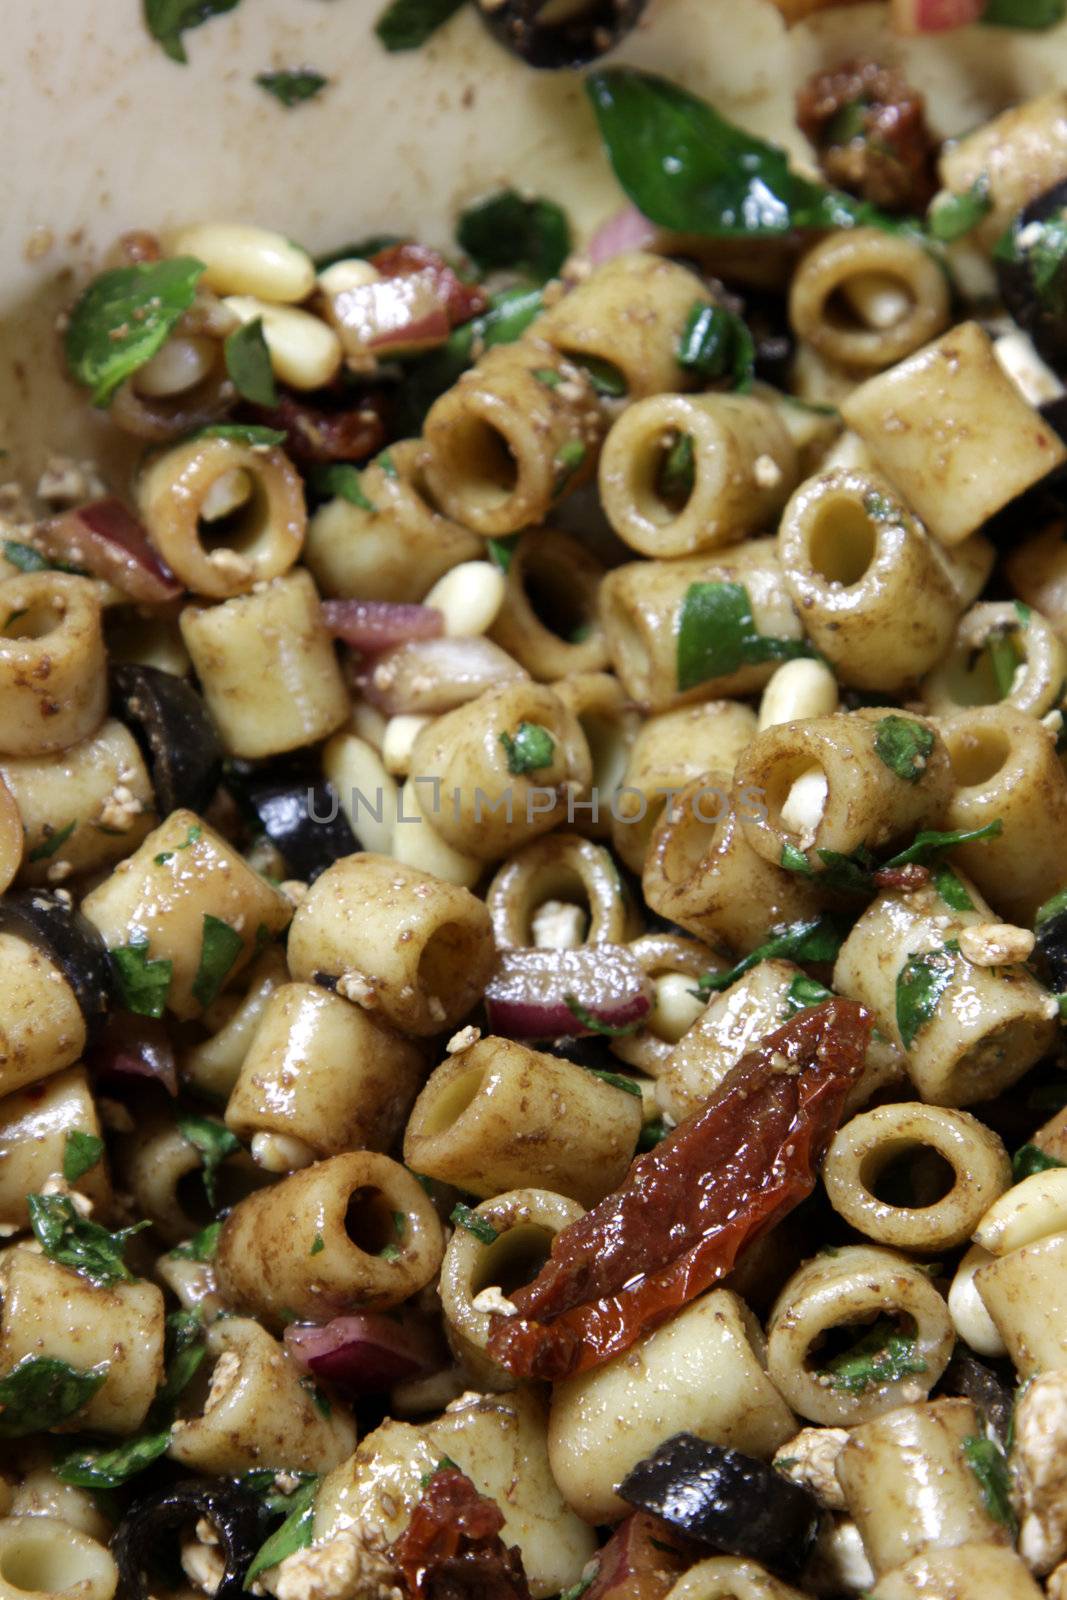 A close-up of greek pasta salad, featuring sun-dried tomatoes, black olives, red onion, pine nuts, spinach,feta cheese, balsamic vinegar and ditali pasta.
